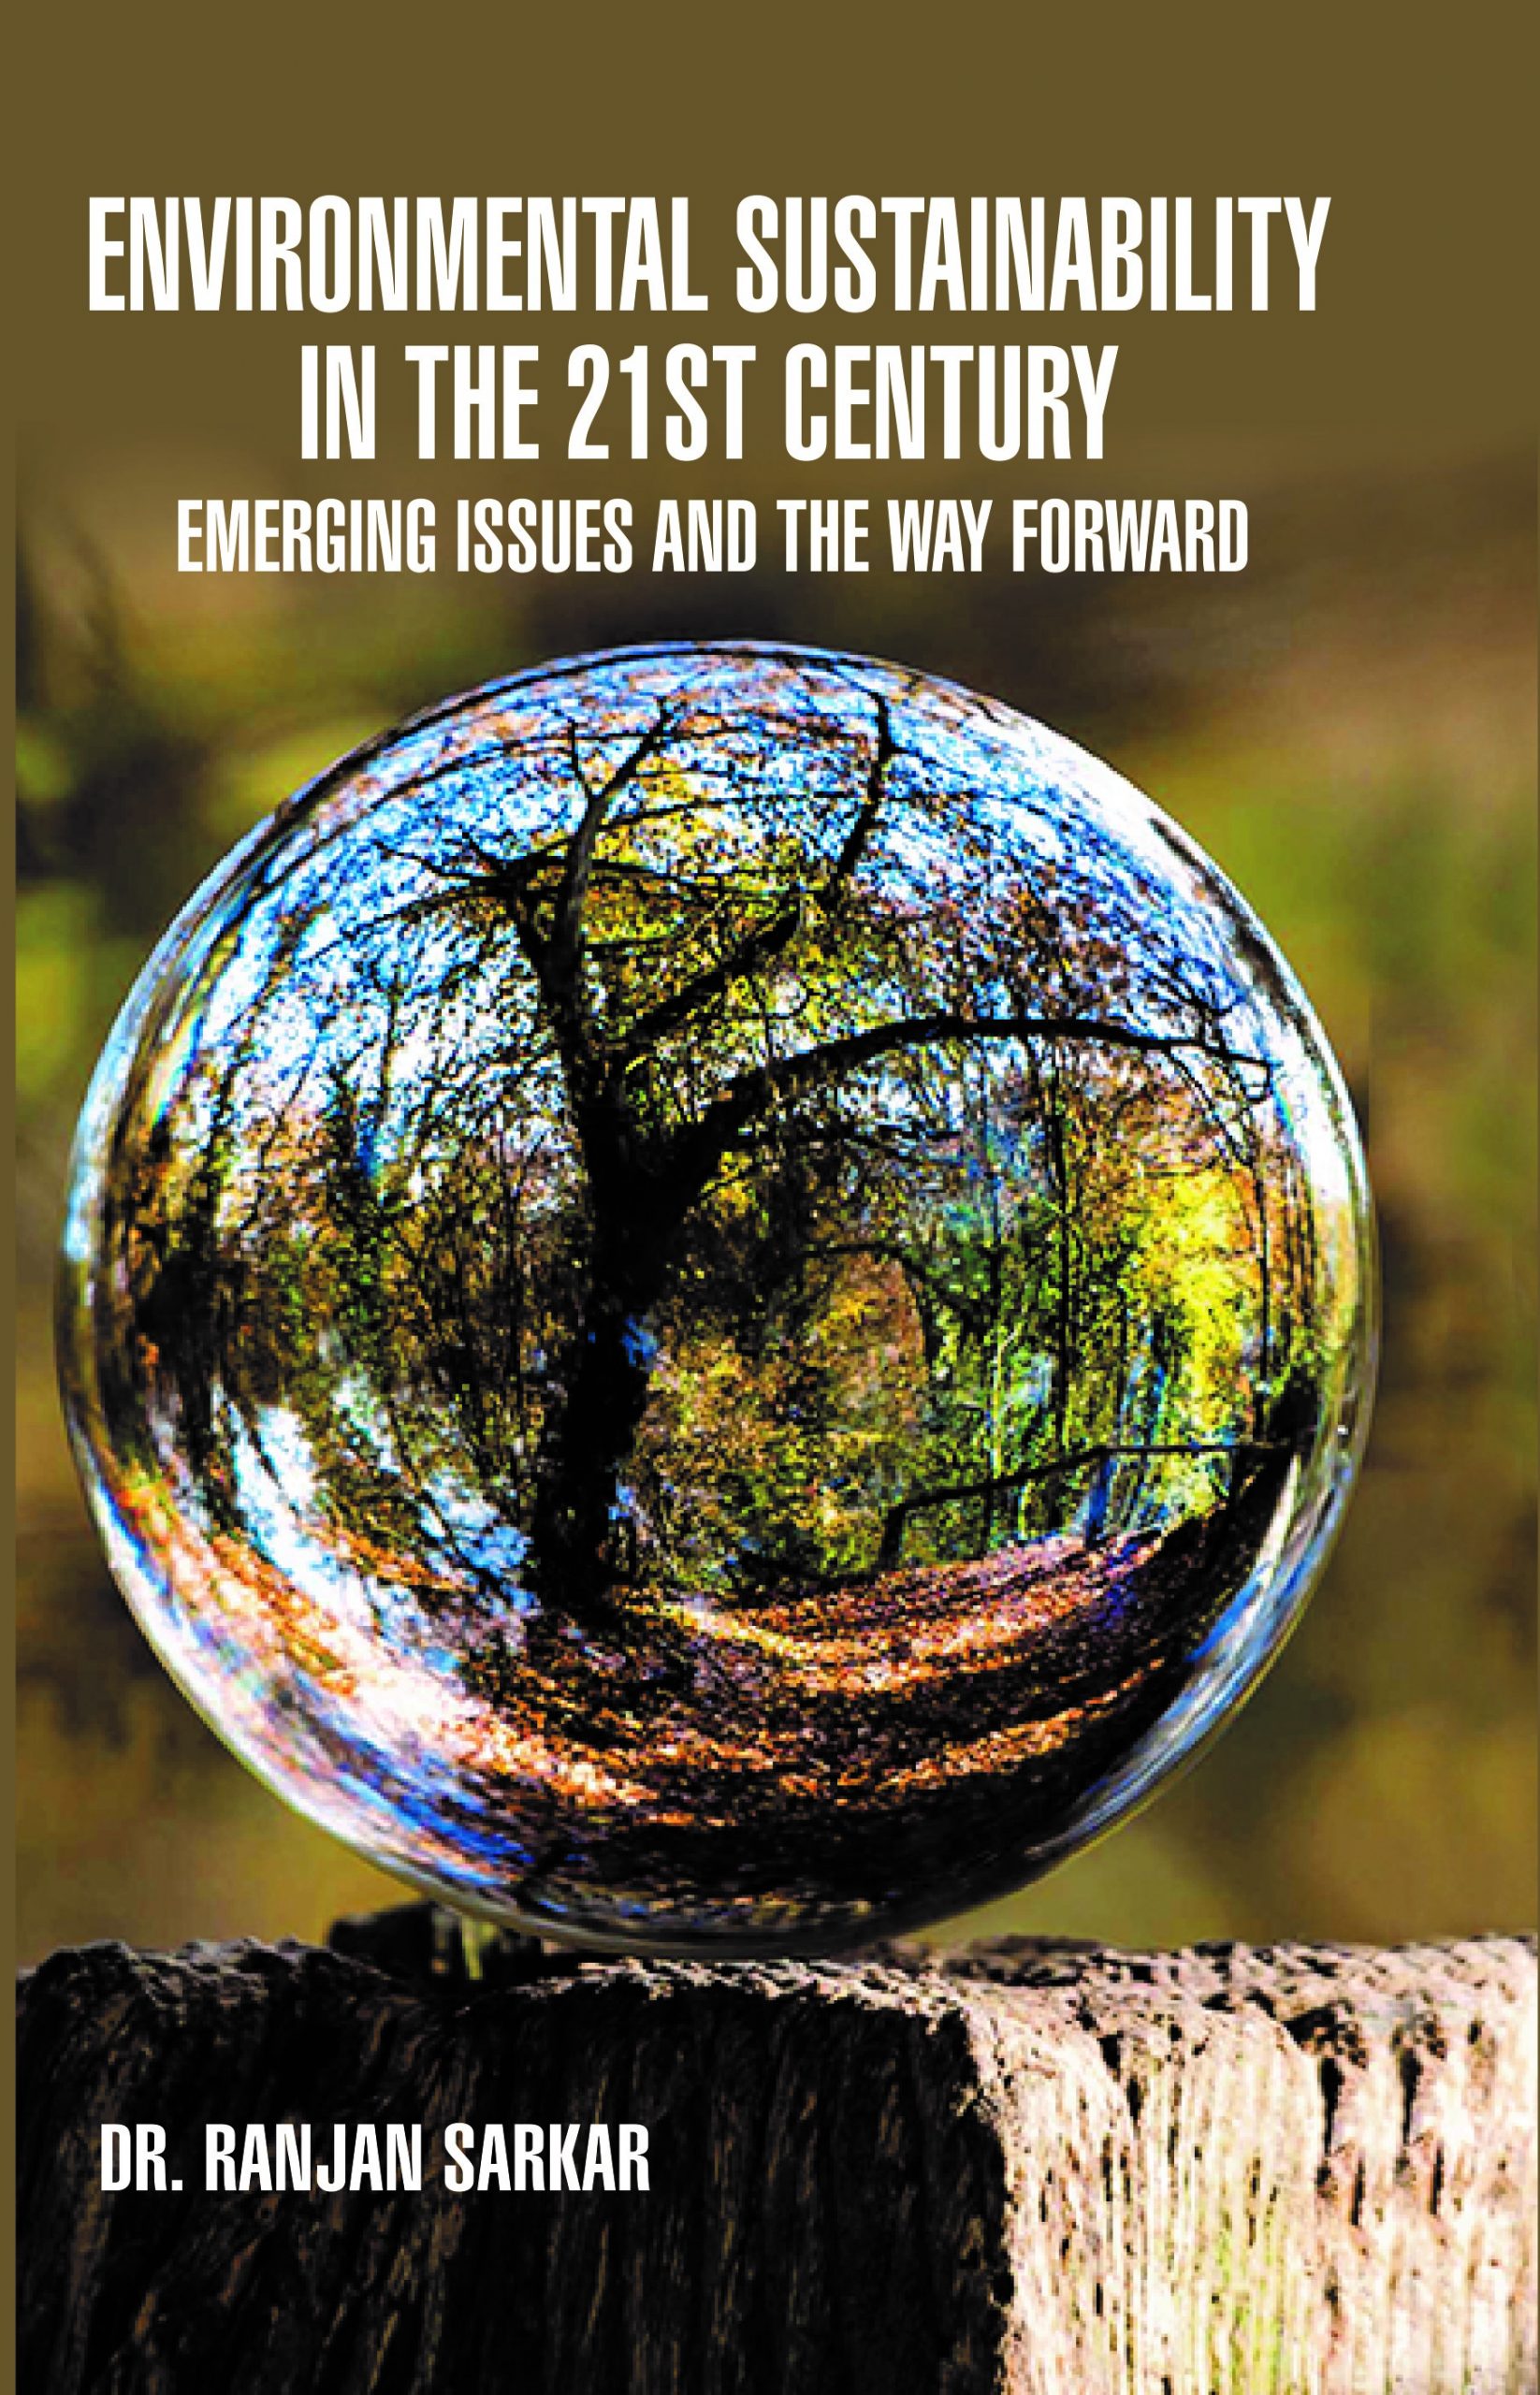 ENVIRONMENTAL SUSTAINABILITY IN THE 21ST CENTURY: EMERGING ISSUES AND THE WAY FORWARD